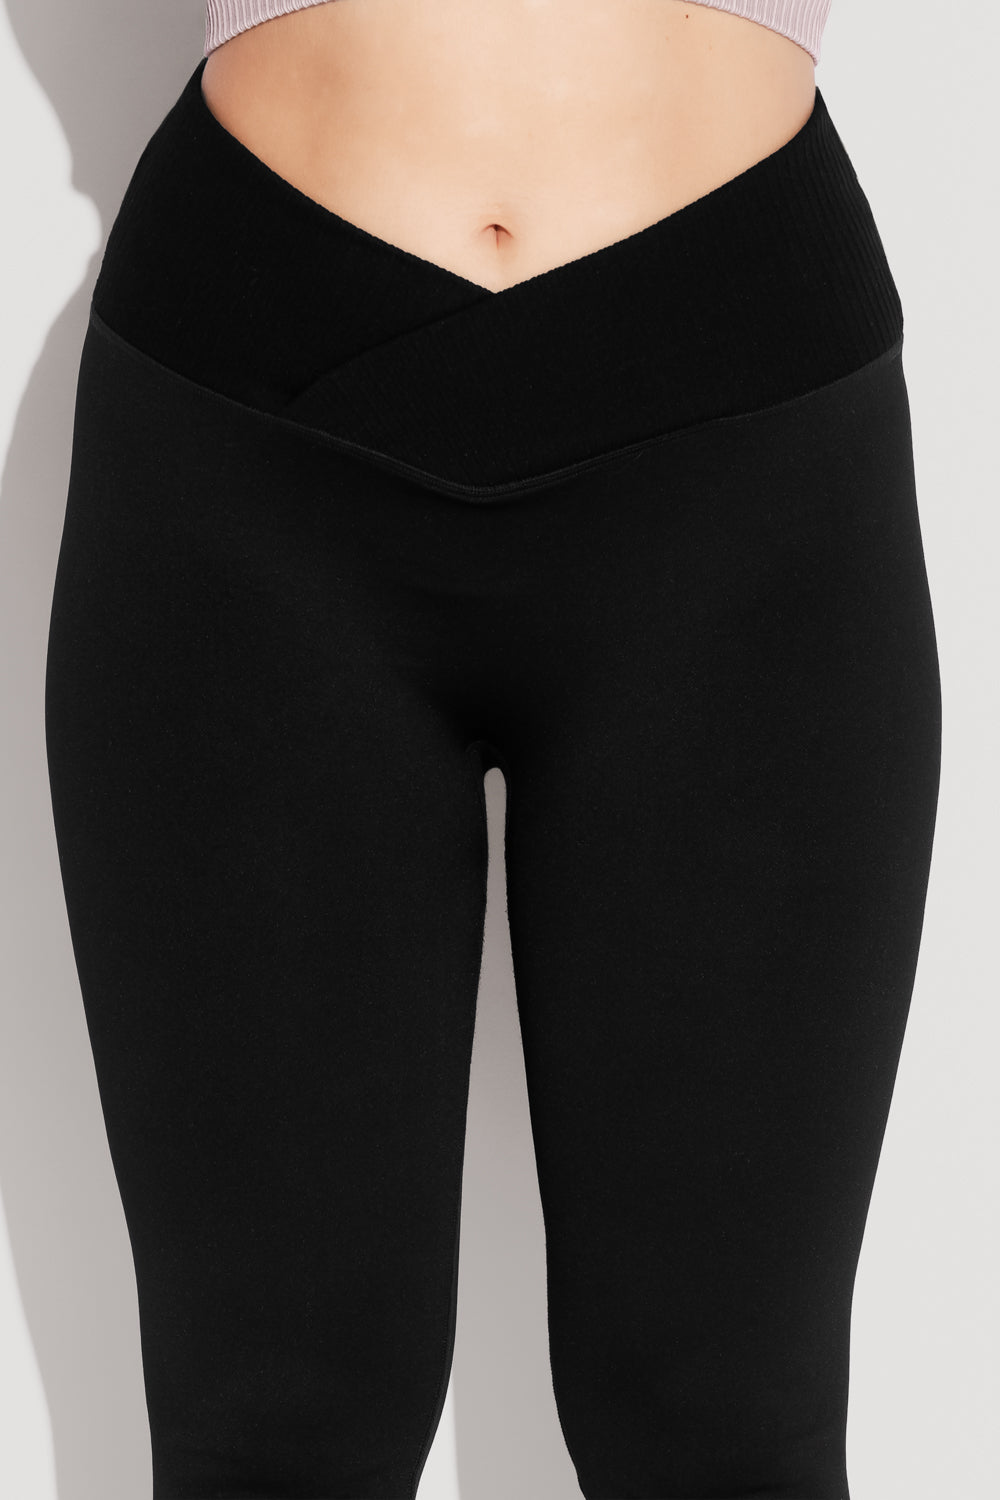 Popfit Black Pop Fit Leggings Size M - $13 (35% Off Retail) New With Tags -  From Caitlin